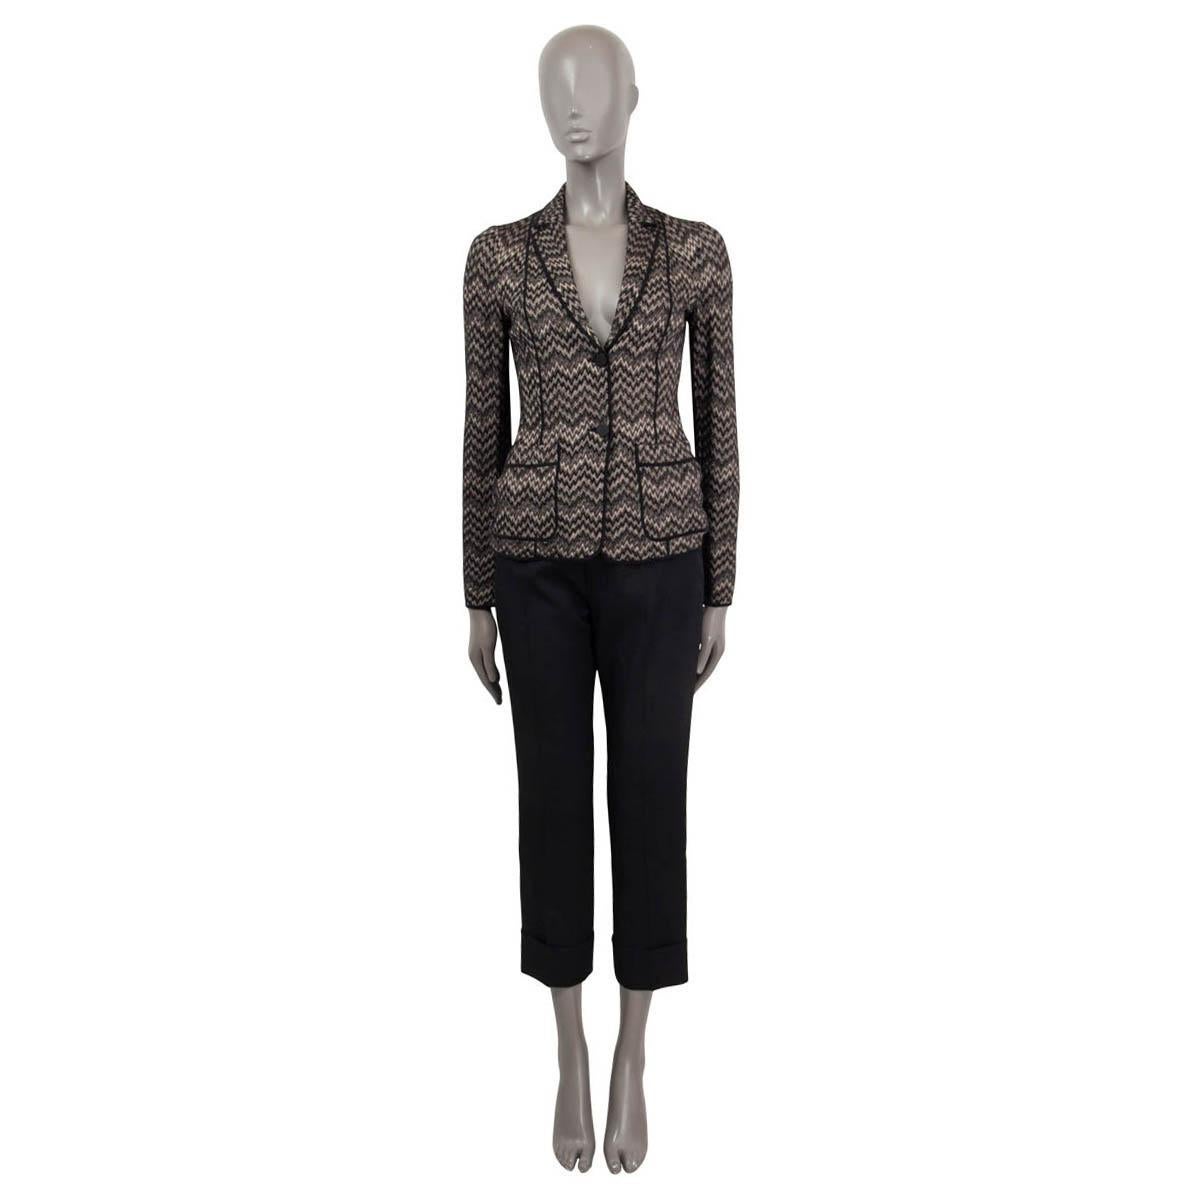 100% authentic Missoni zig zag soft knit blazer in black and taupe wool (60%) and rayon (40%). Features long sleeves and sewn shut patch pockets on the front. Opens with two buttons on the front. Unlined. Has been worn and is in excellent